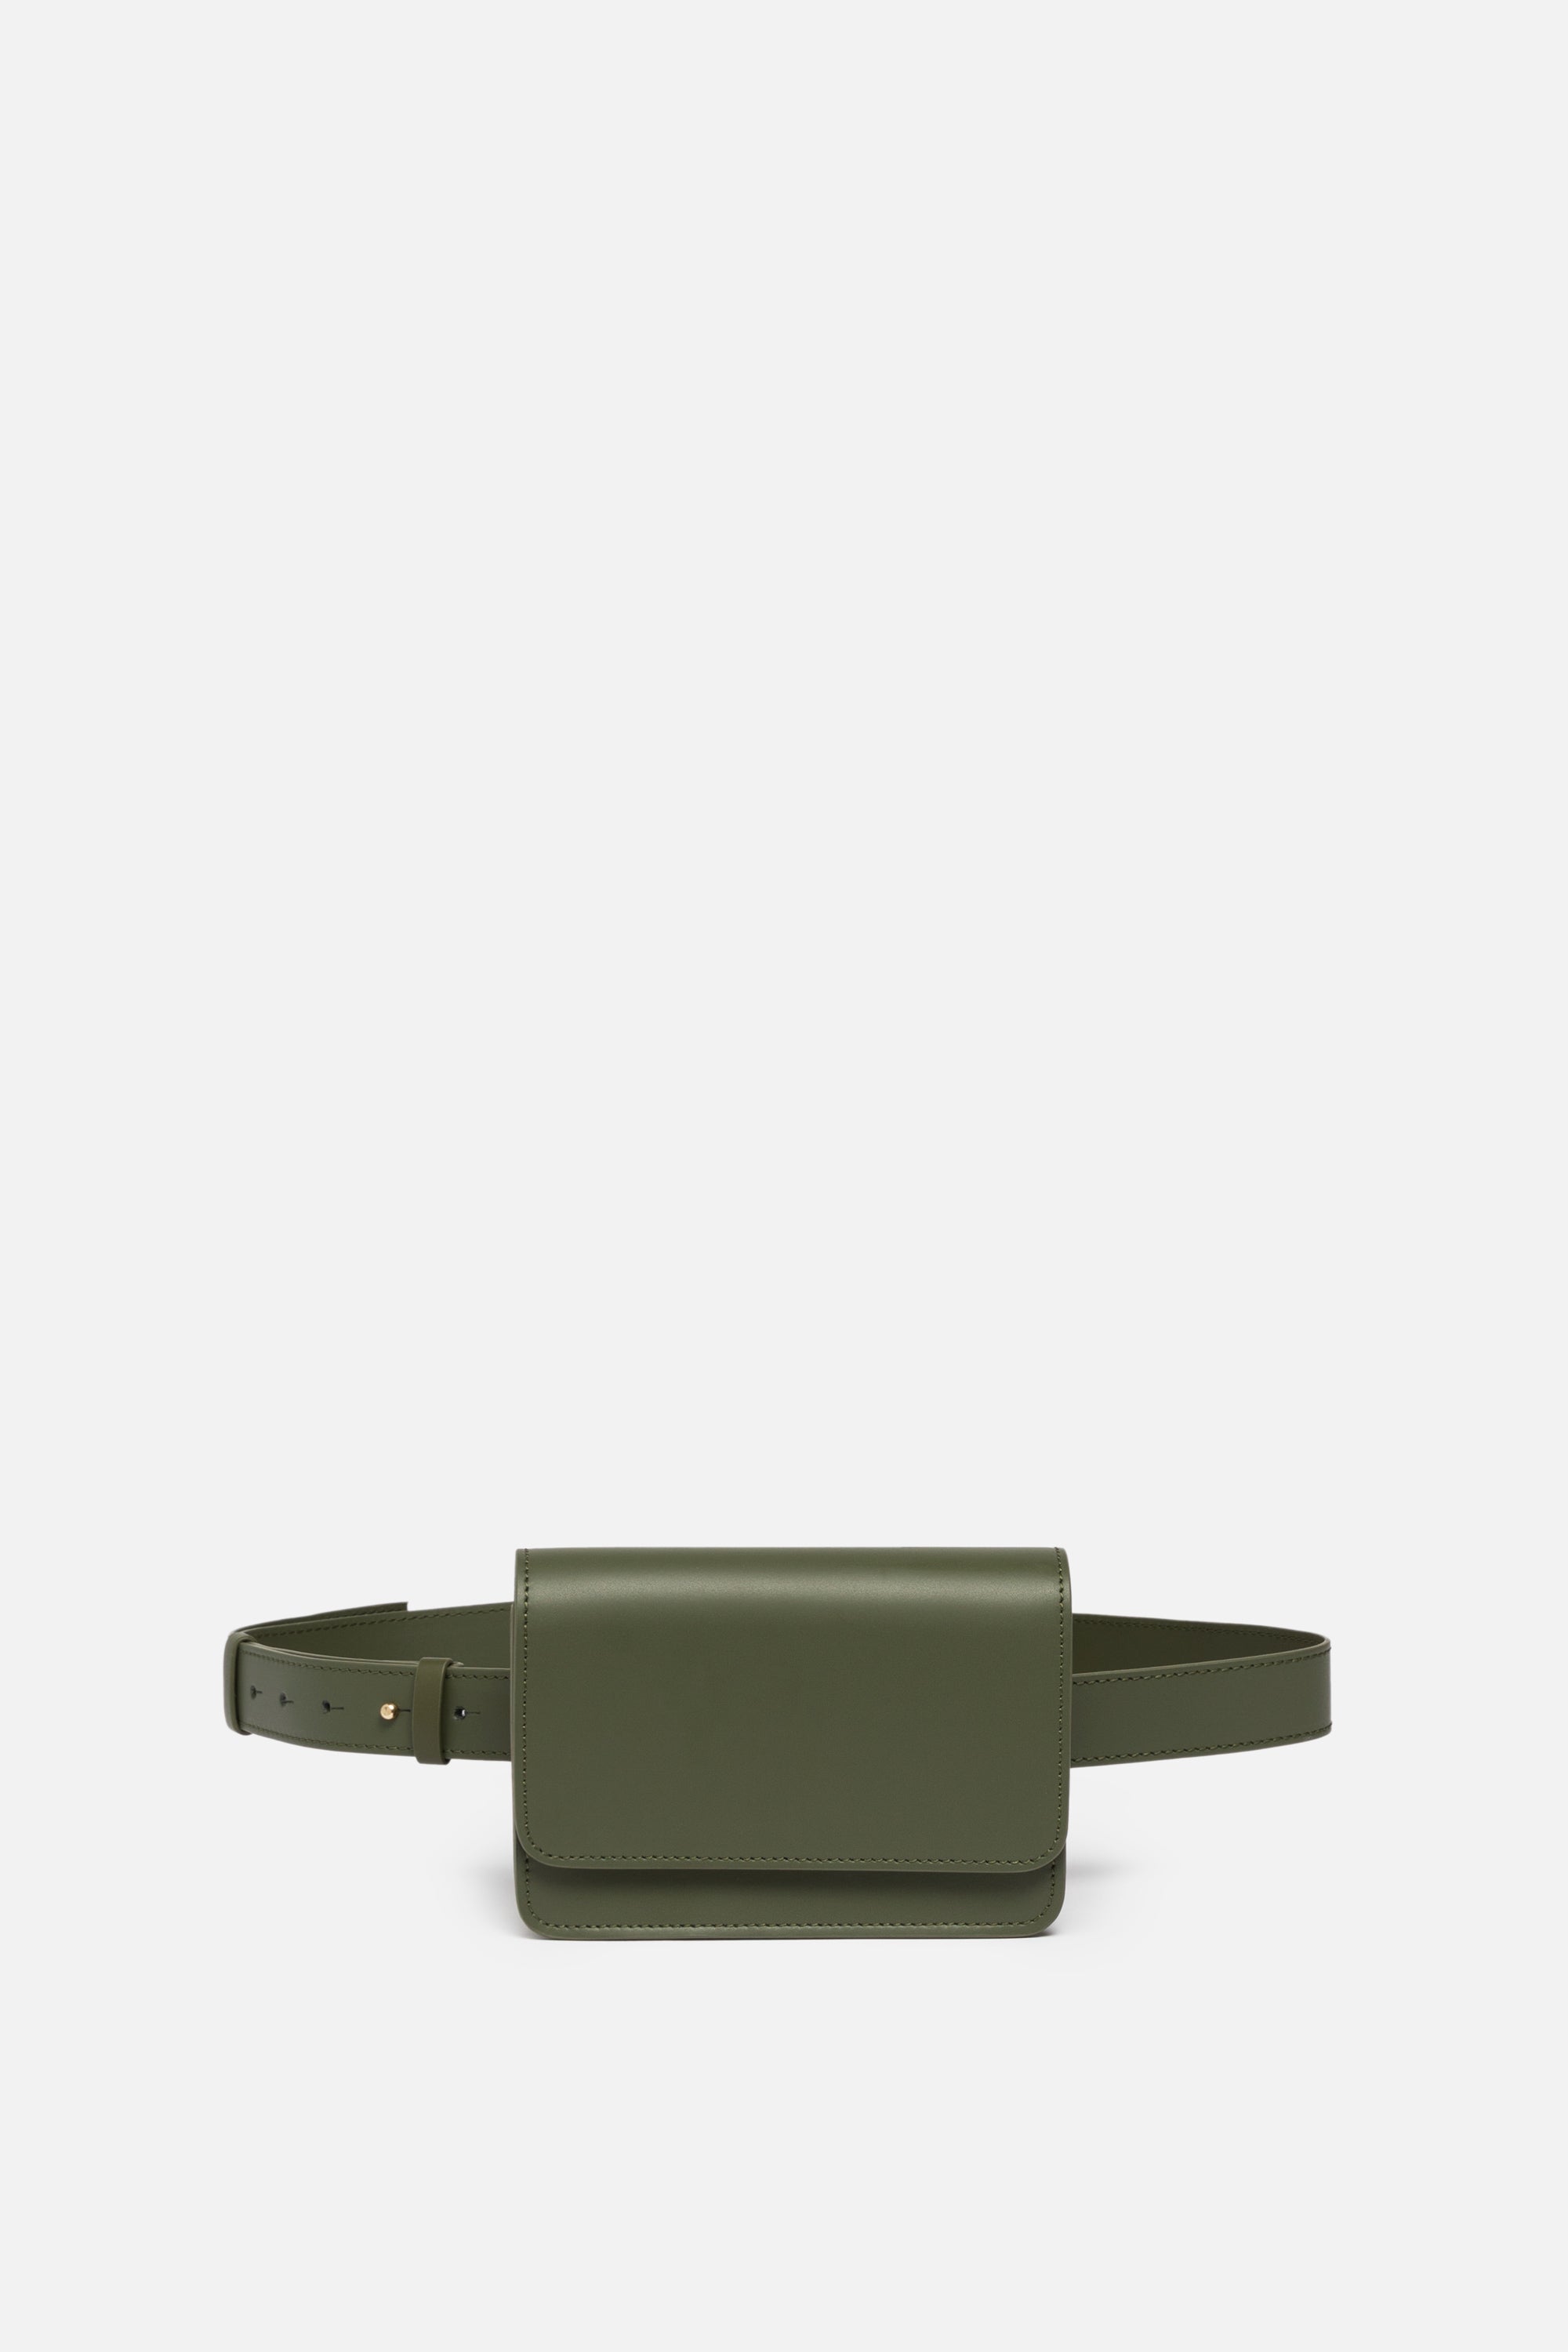 Silver & Riley Parisian Leather Belt Bag in Olive Green